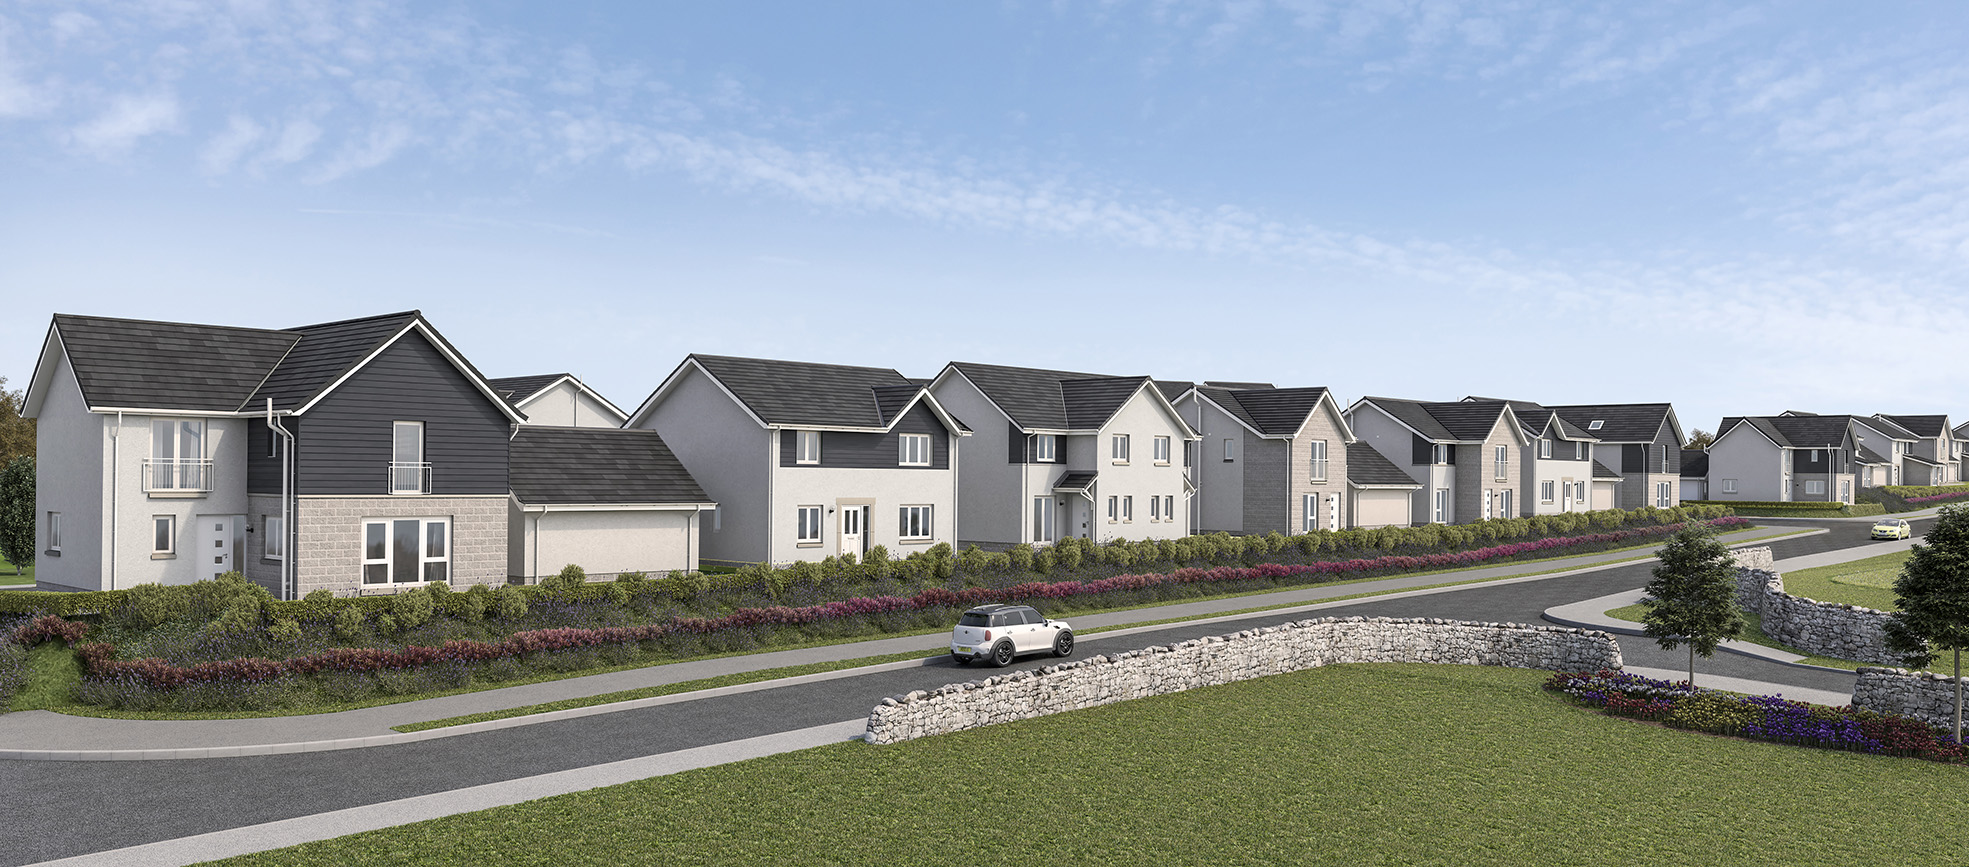 Bancon Homes purchases new site in Aberdeen